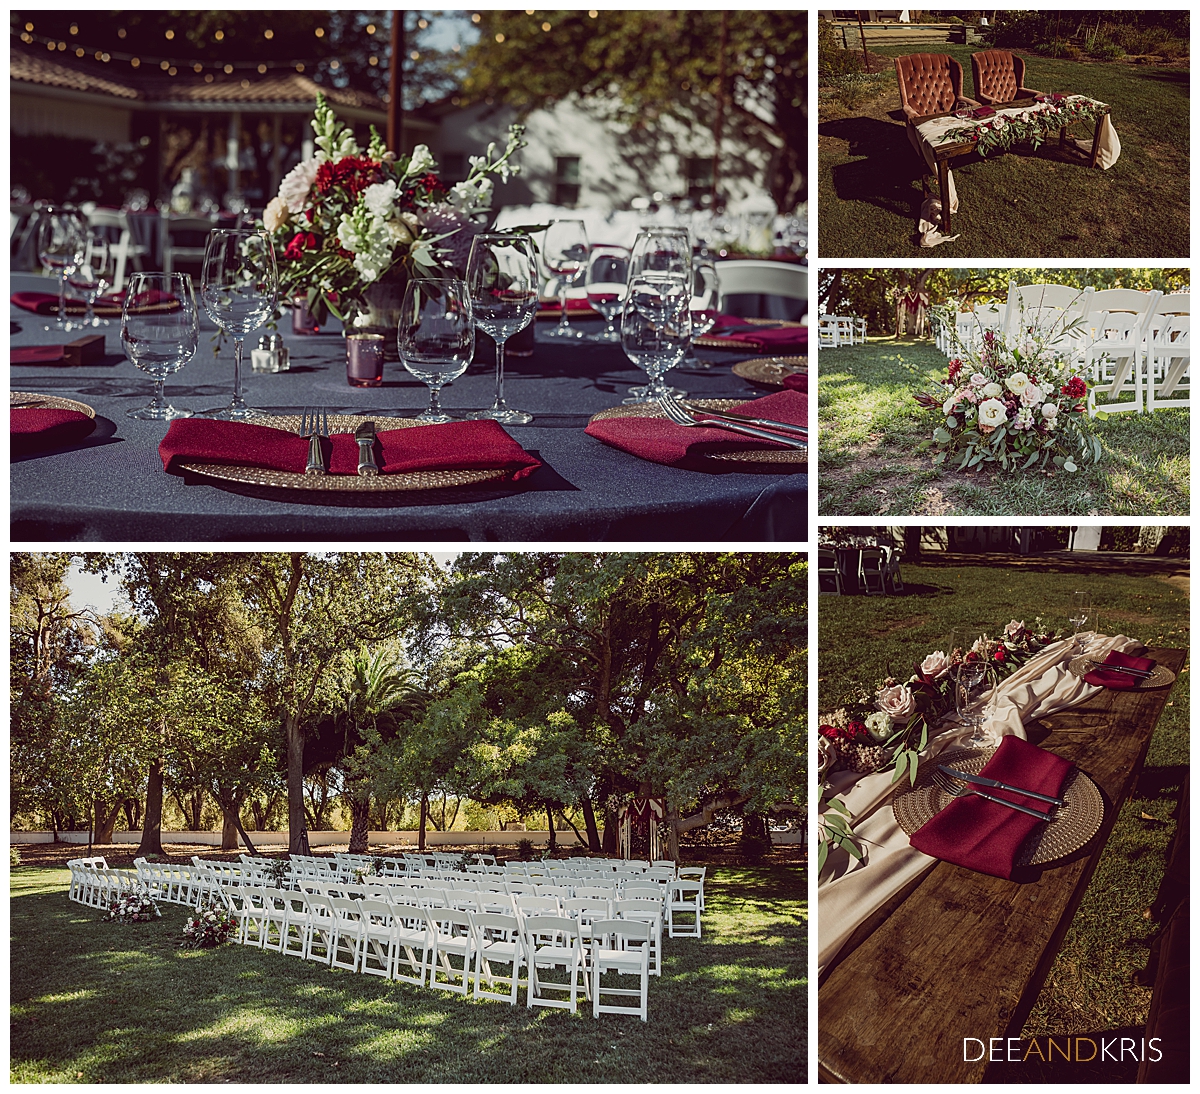 Four images of the table setting details and seating.